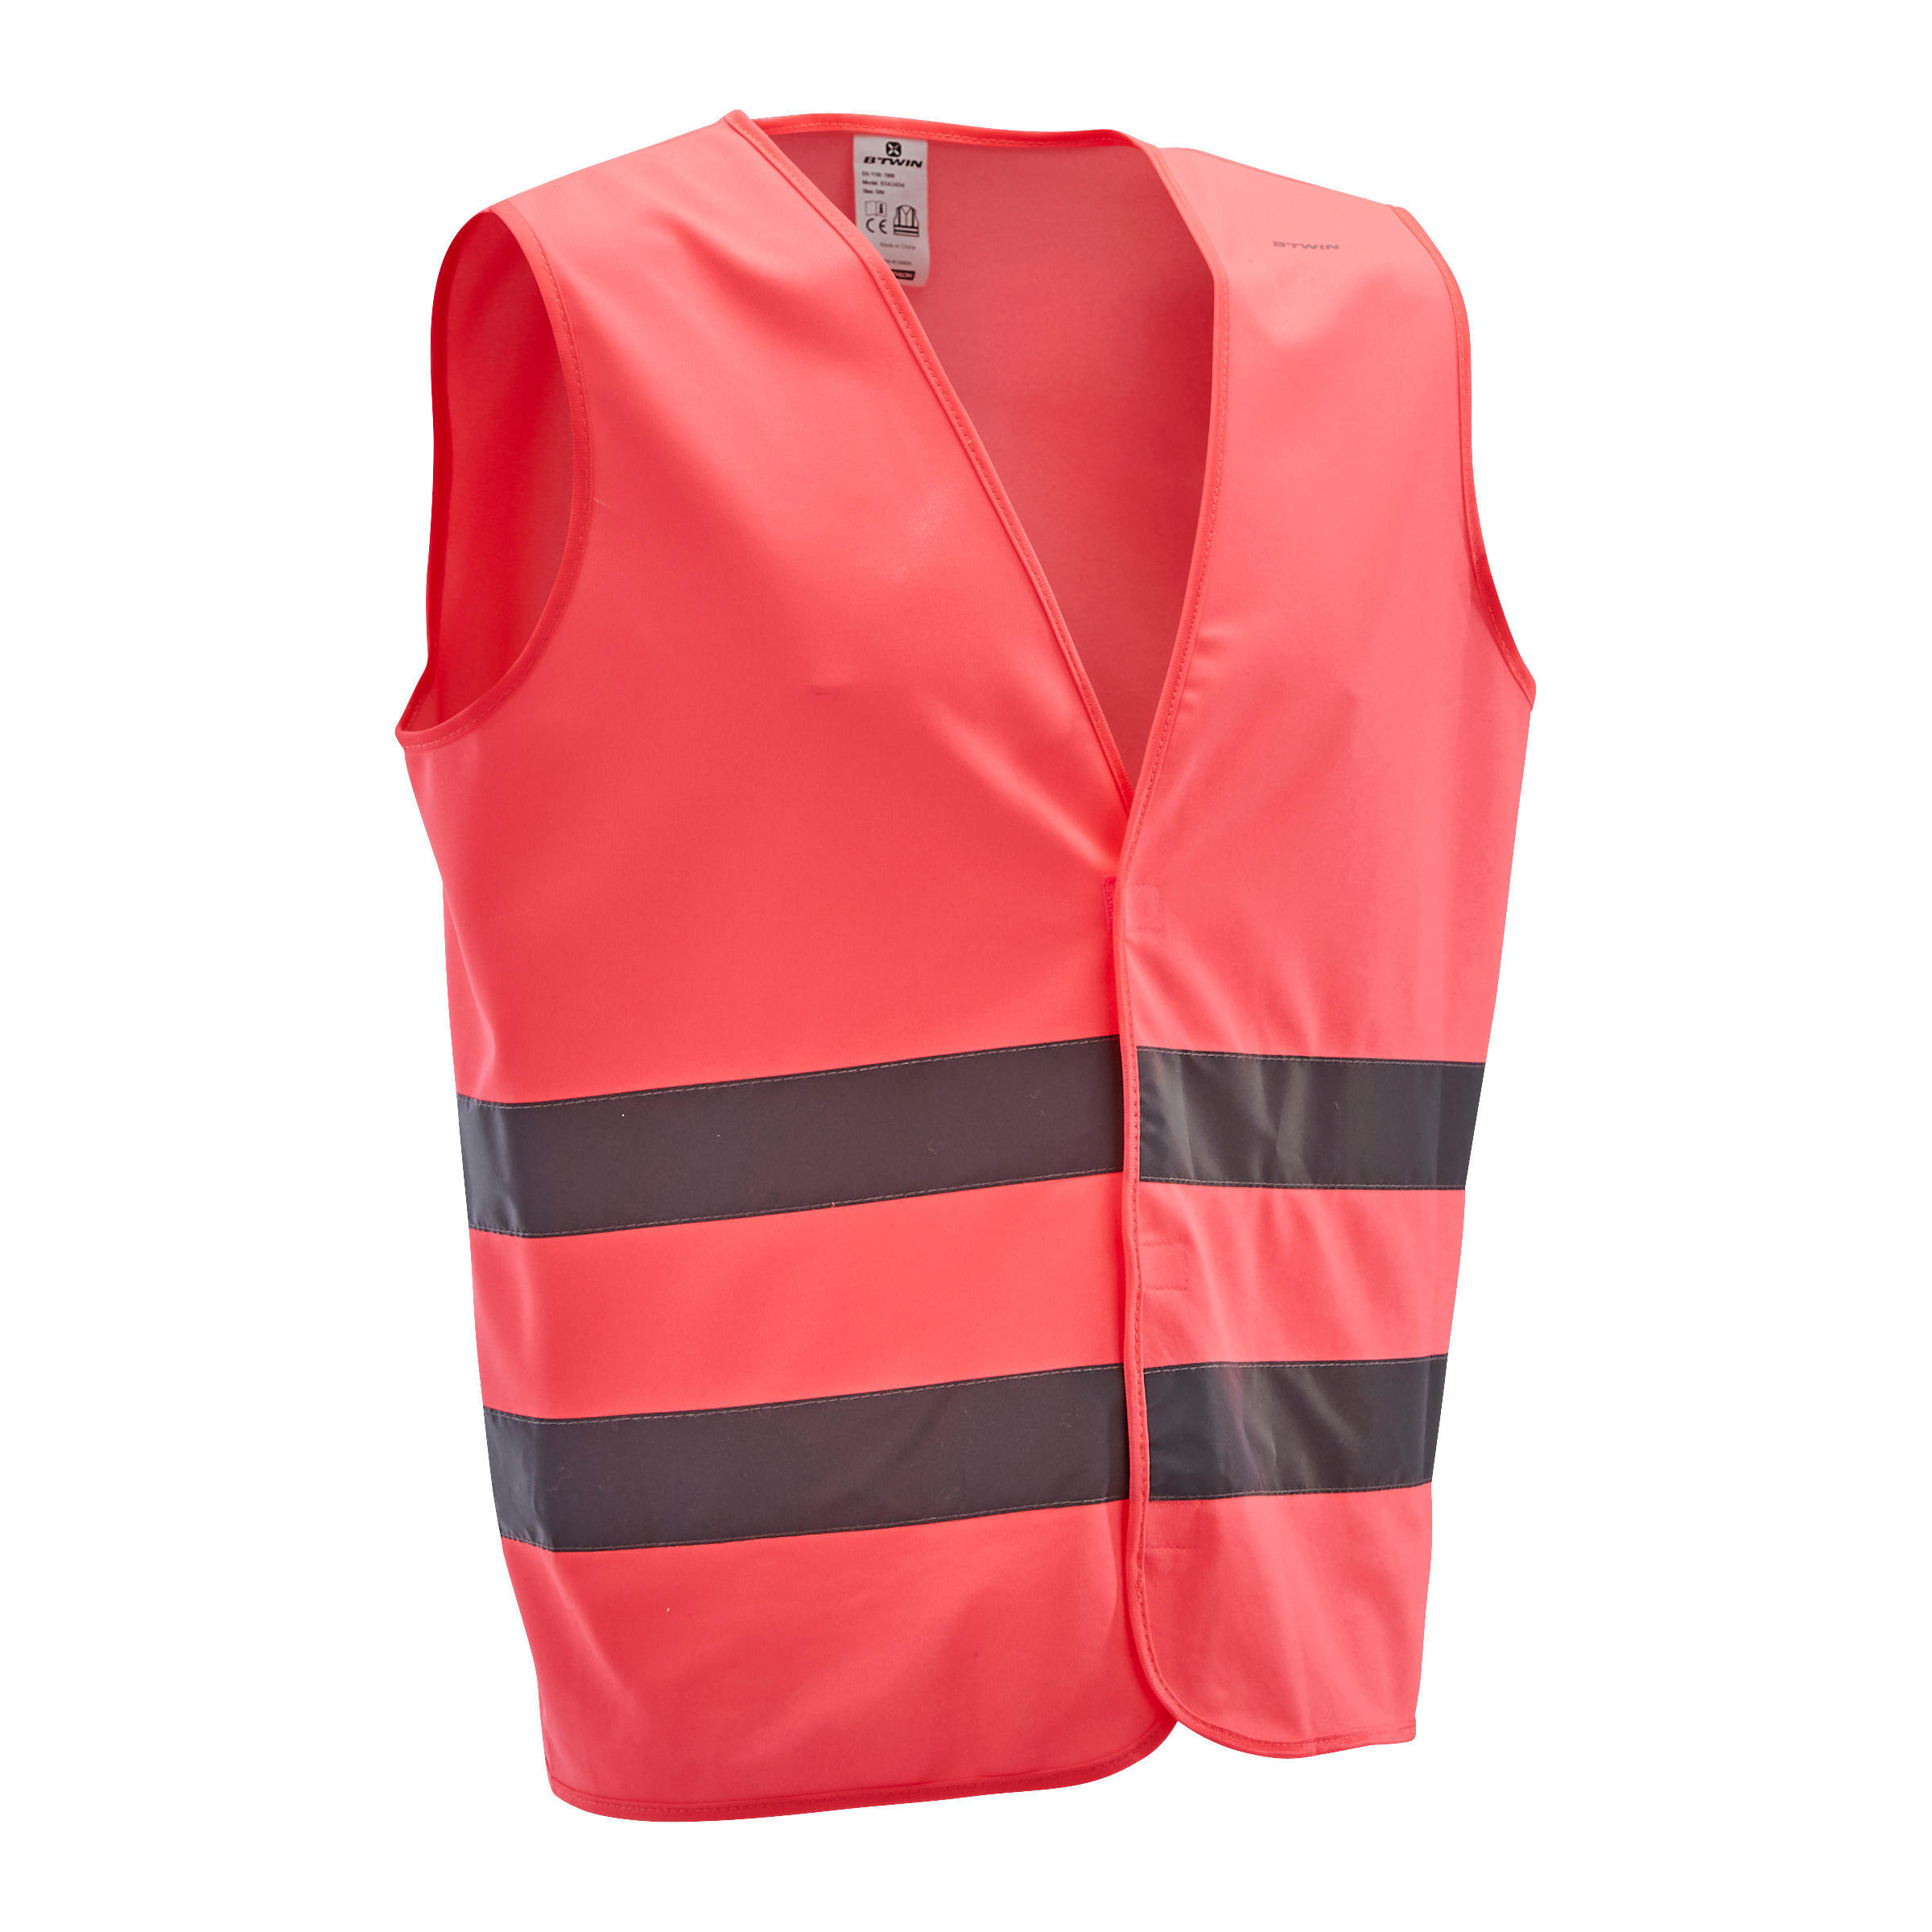 BTWIN Adult High Visibility Safety Vest 500 - Neon Pink